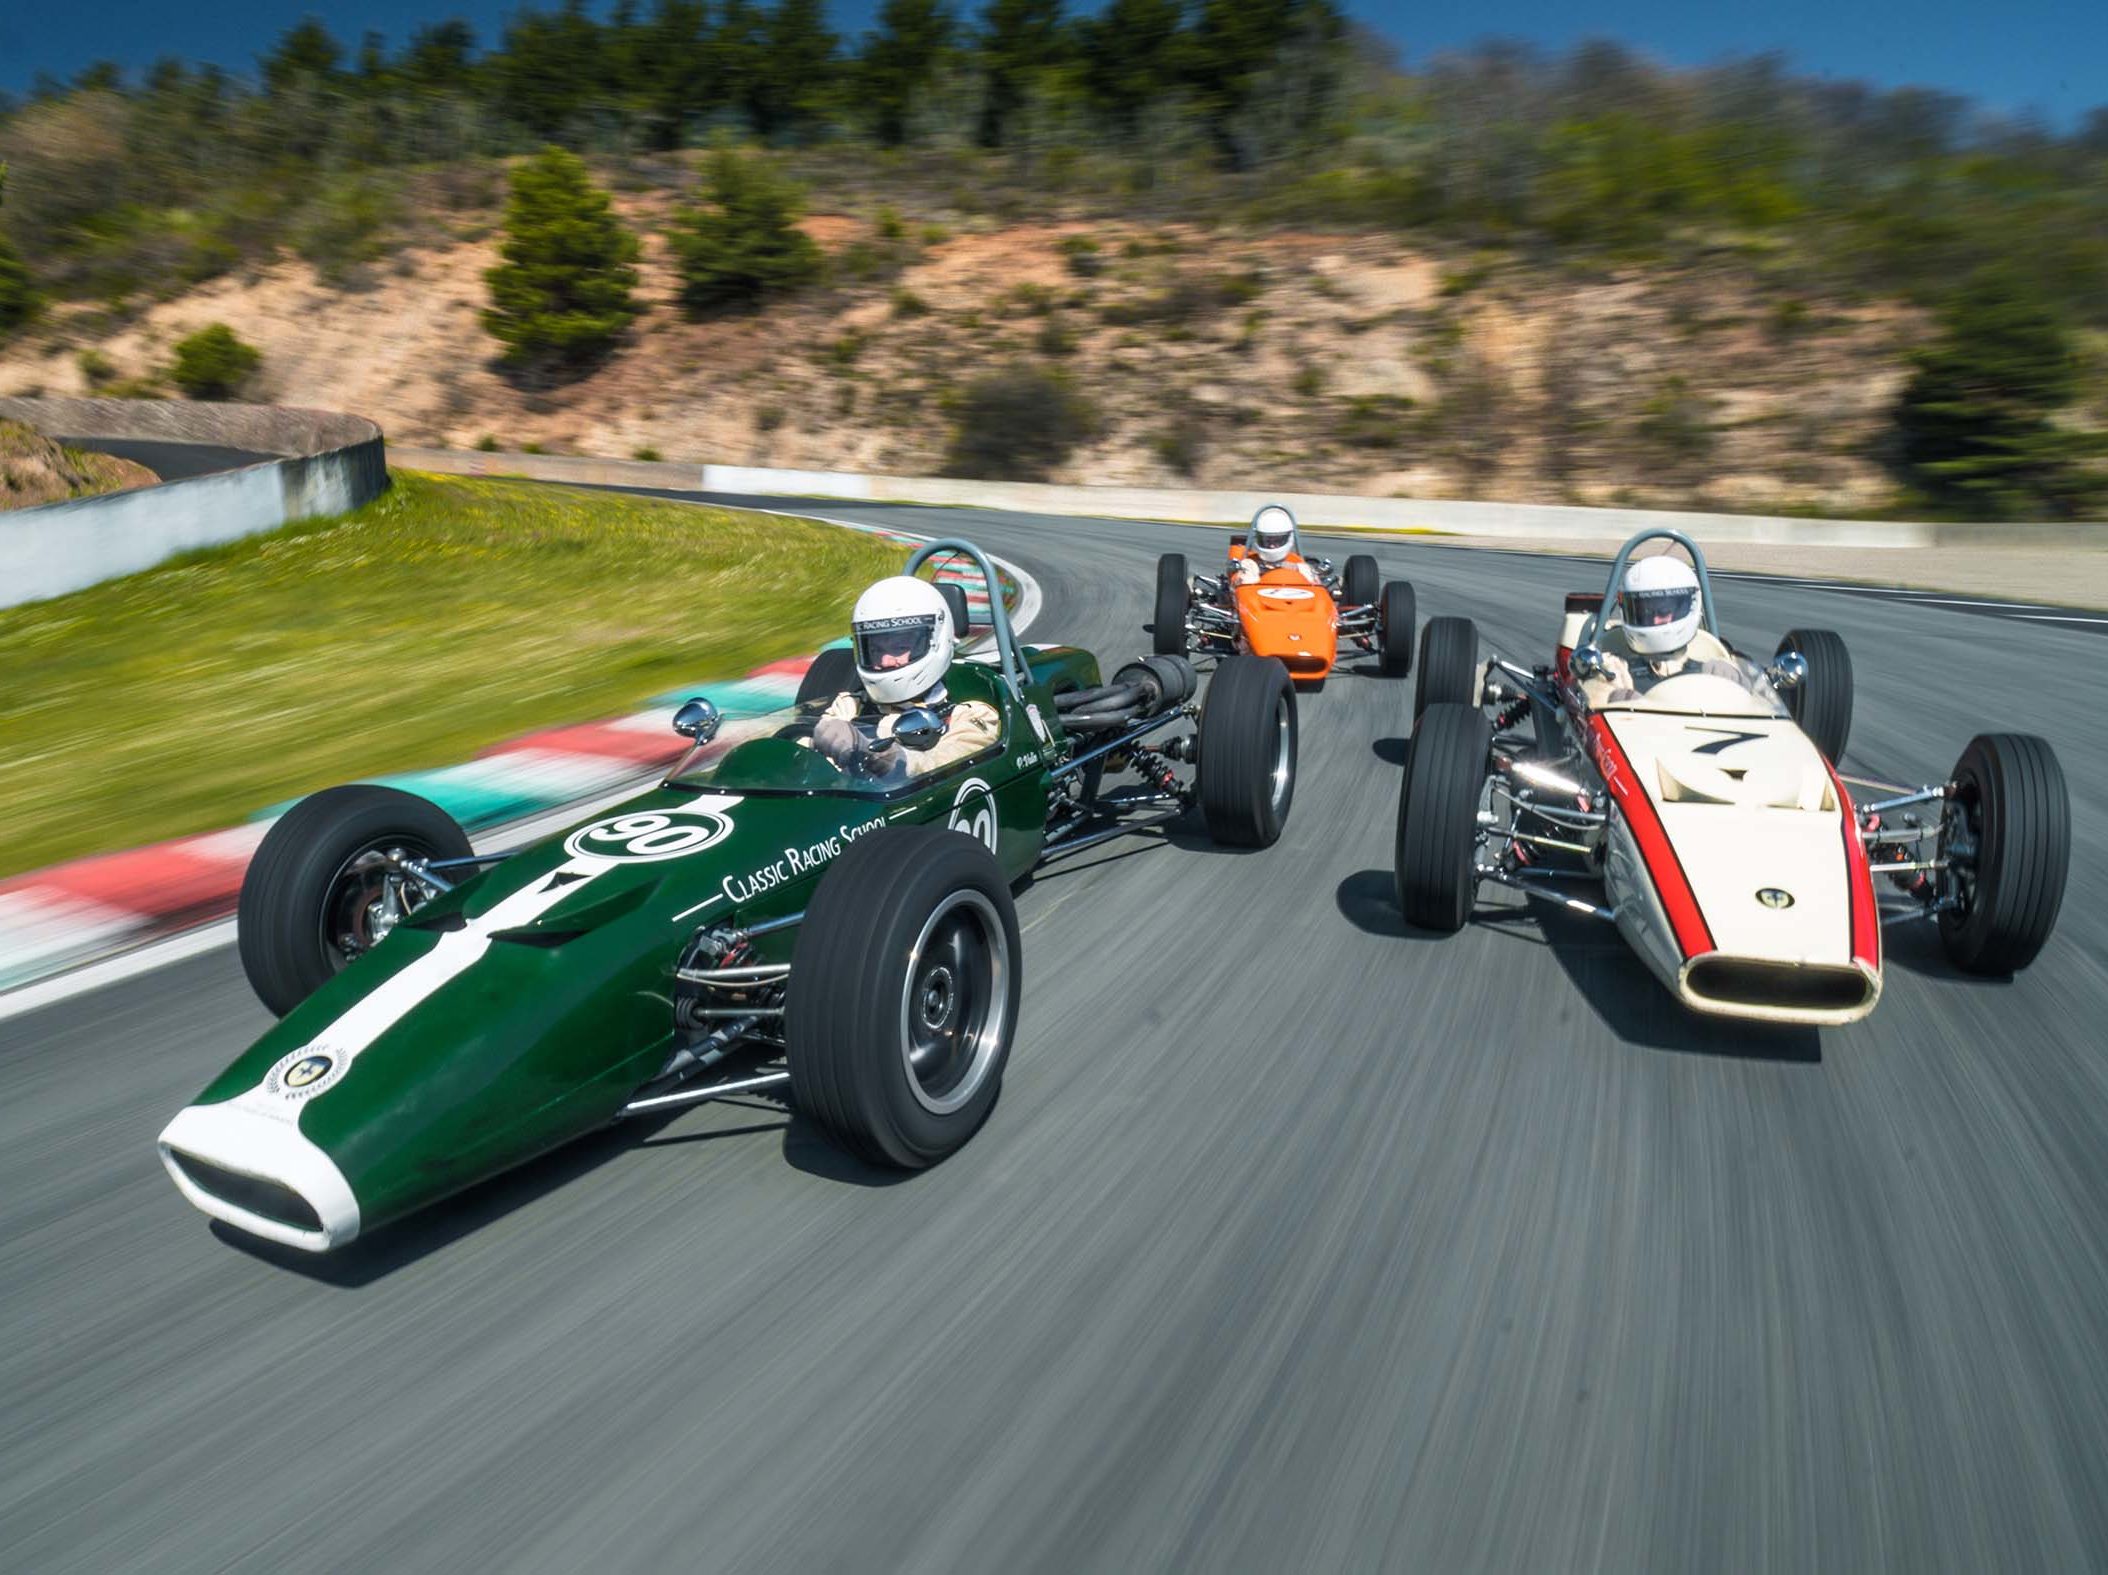 About our 60's racing experience